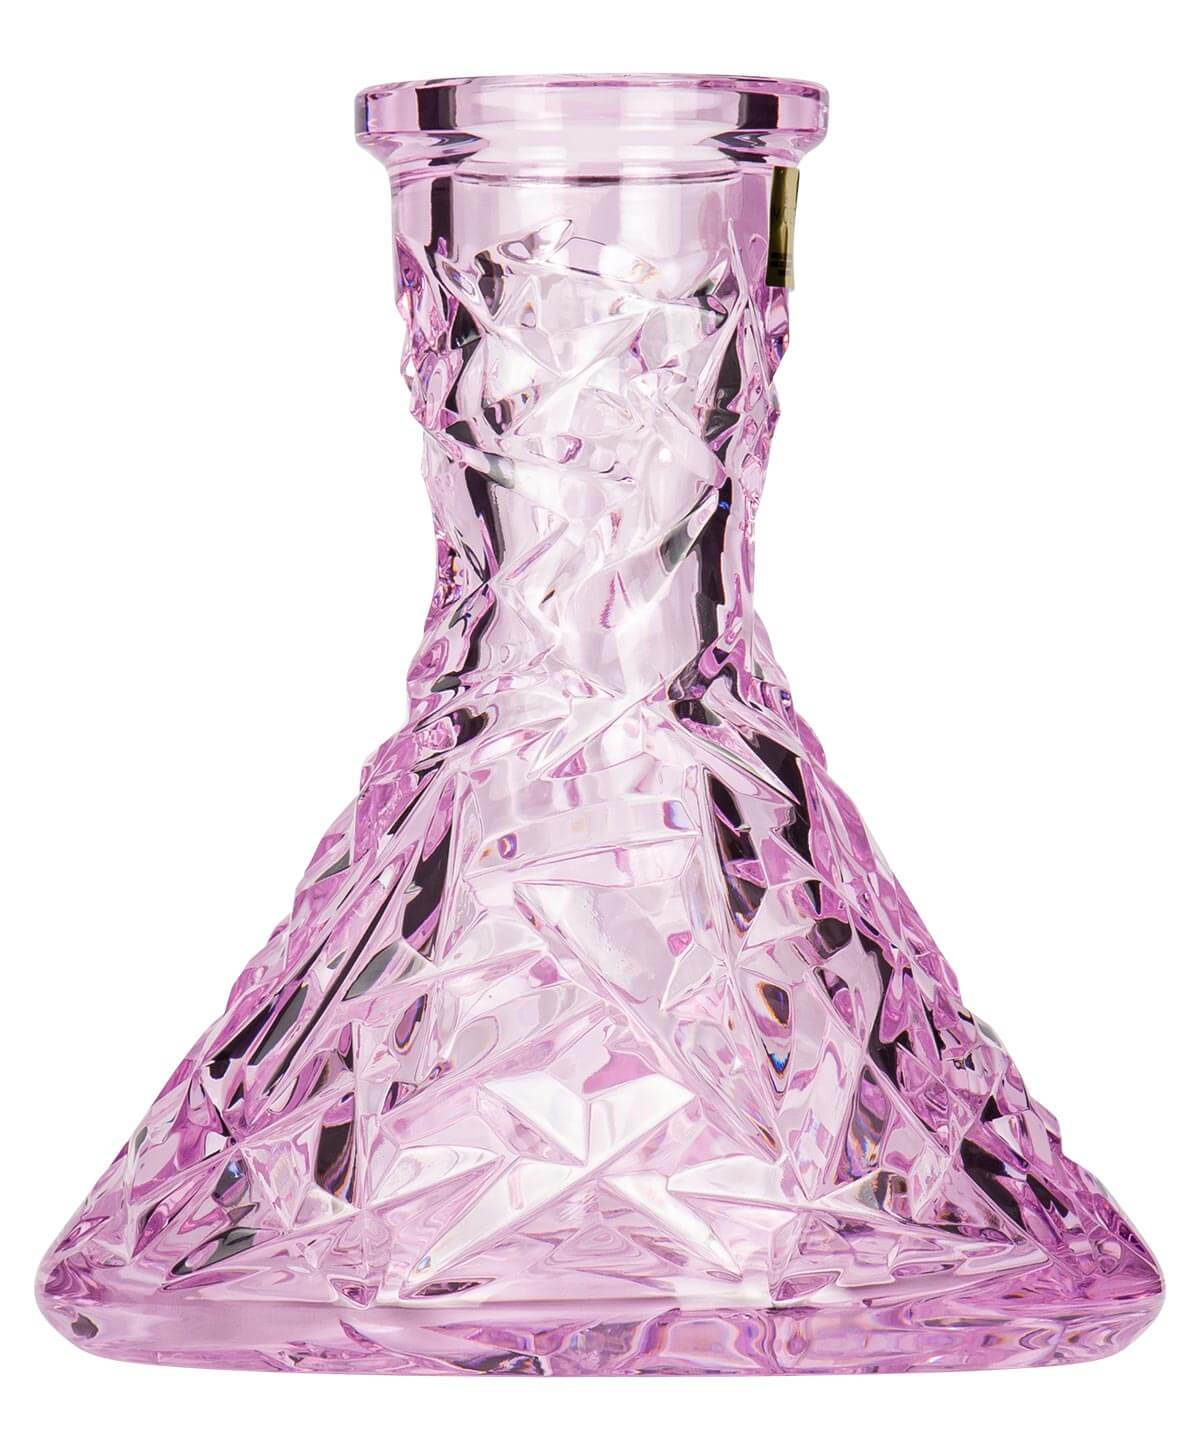 Moze Exclusive Glass Cone - Rock - Pink